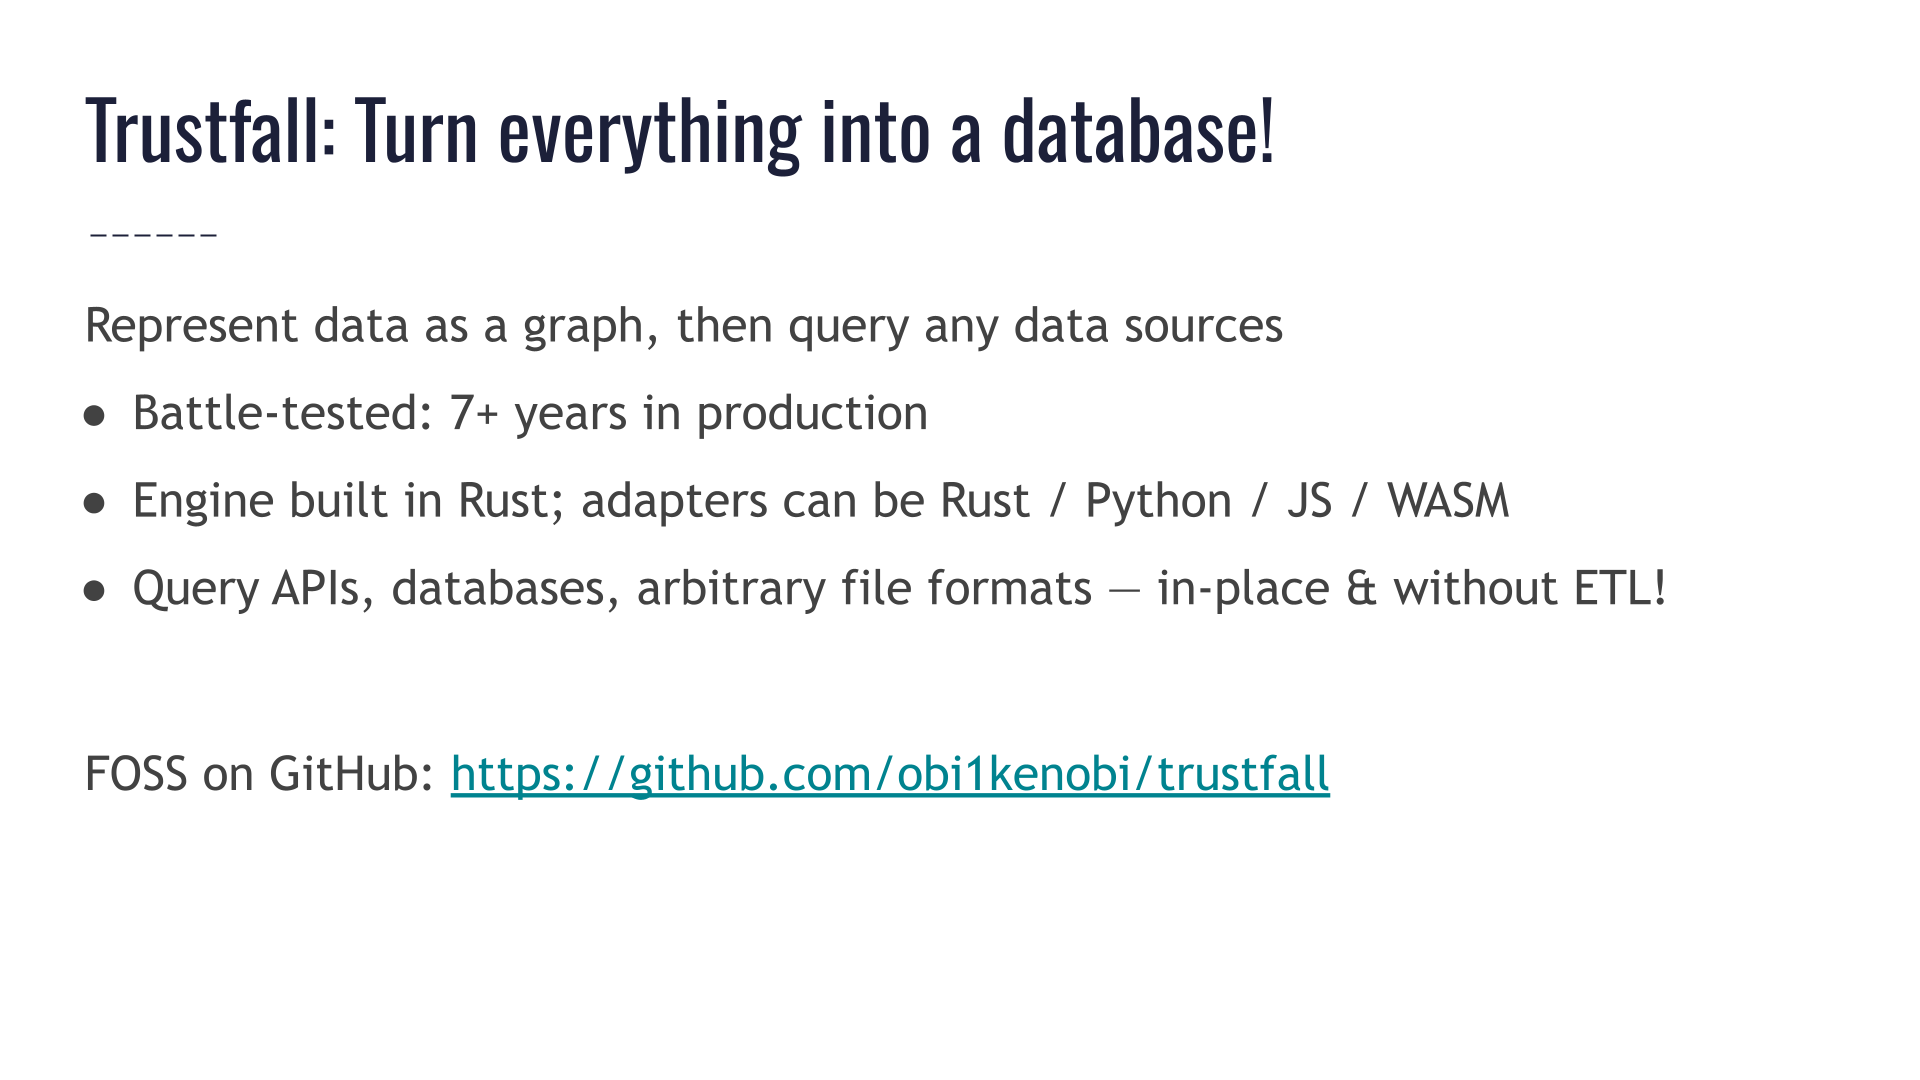 Slide titled "Trustfall: Turn everything into a database!" Represent data as a graph, then query any data sources. Battle-tested: 7+ years in production. Engine built in Rust; adapters can be Rust, Python, JavaScript, or WebAssembly. You can query APIs, databases, arbitrary file formats — all in-place and without ETL. The project is free & open-source on GitHub: https://github.com/obi1kenobi/trustfall